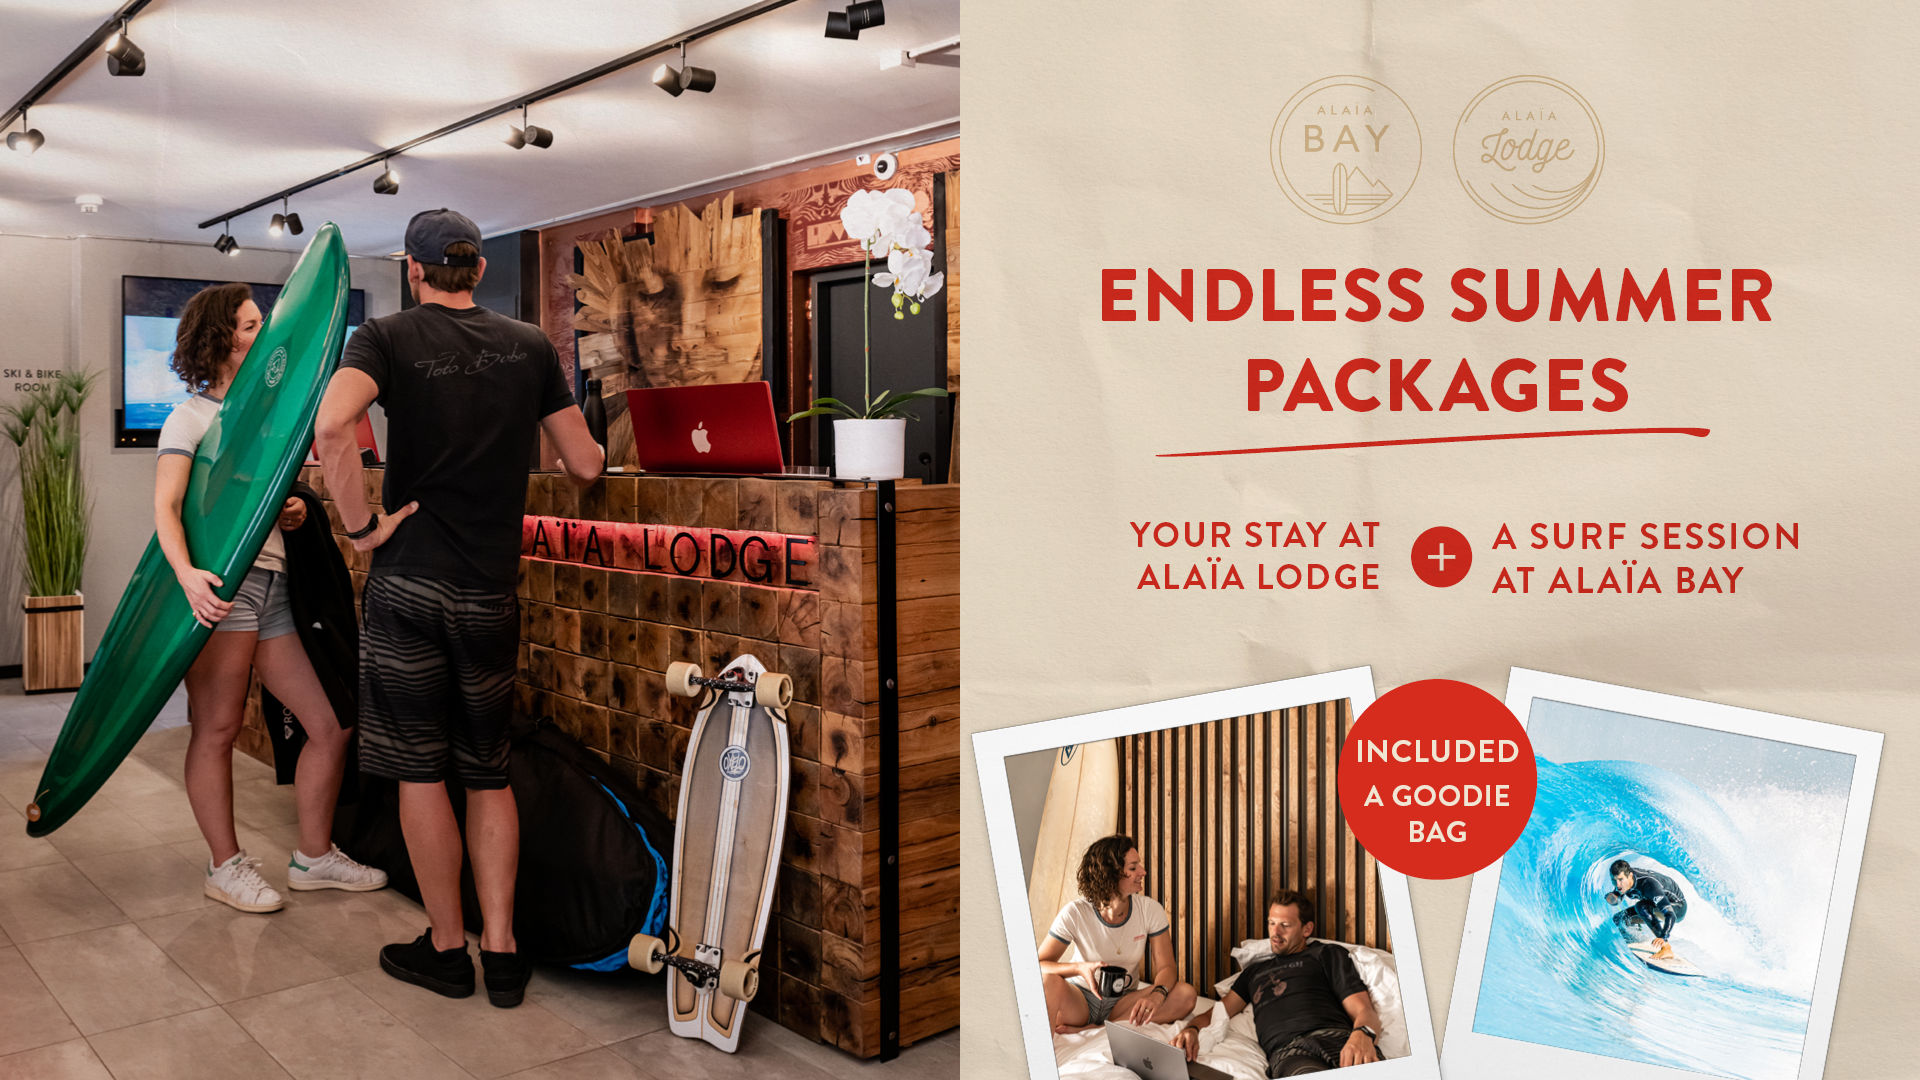 THE ENDLESS SUMMER PACKAGES EASY AND COZY